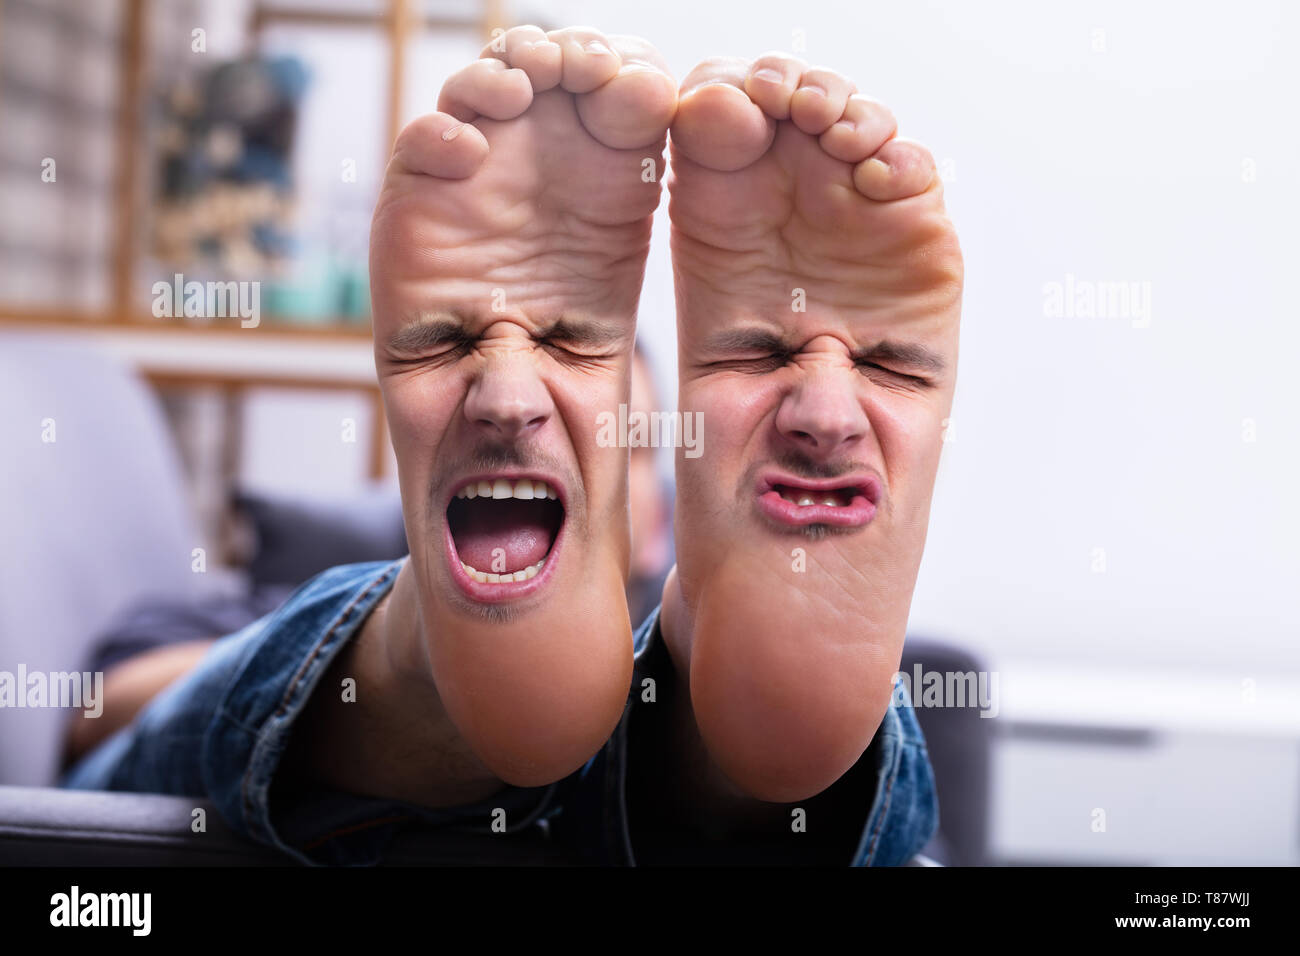 Close-up Of Man's Feet With Painful Facial Expression Stock Photo